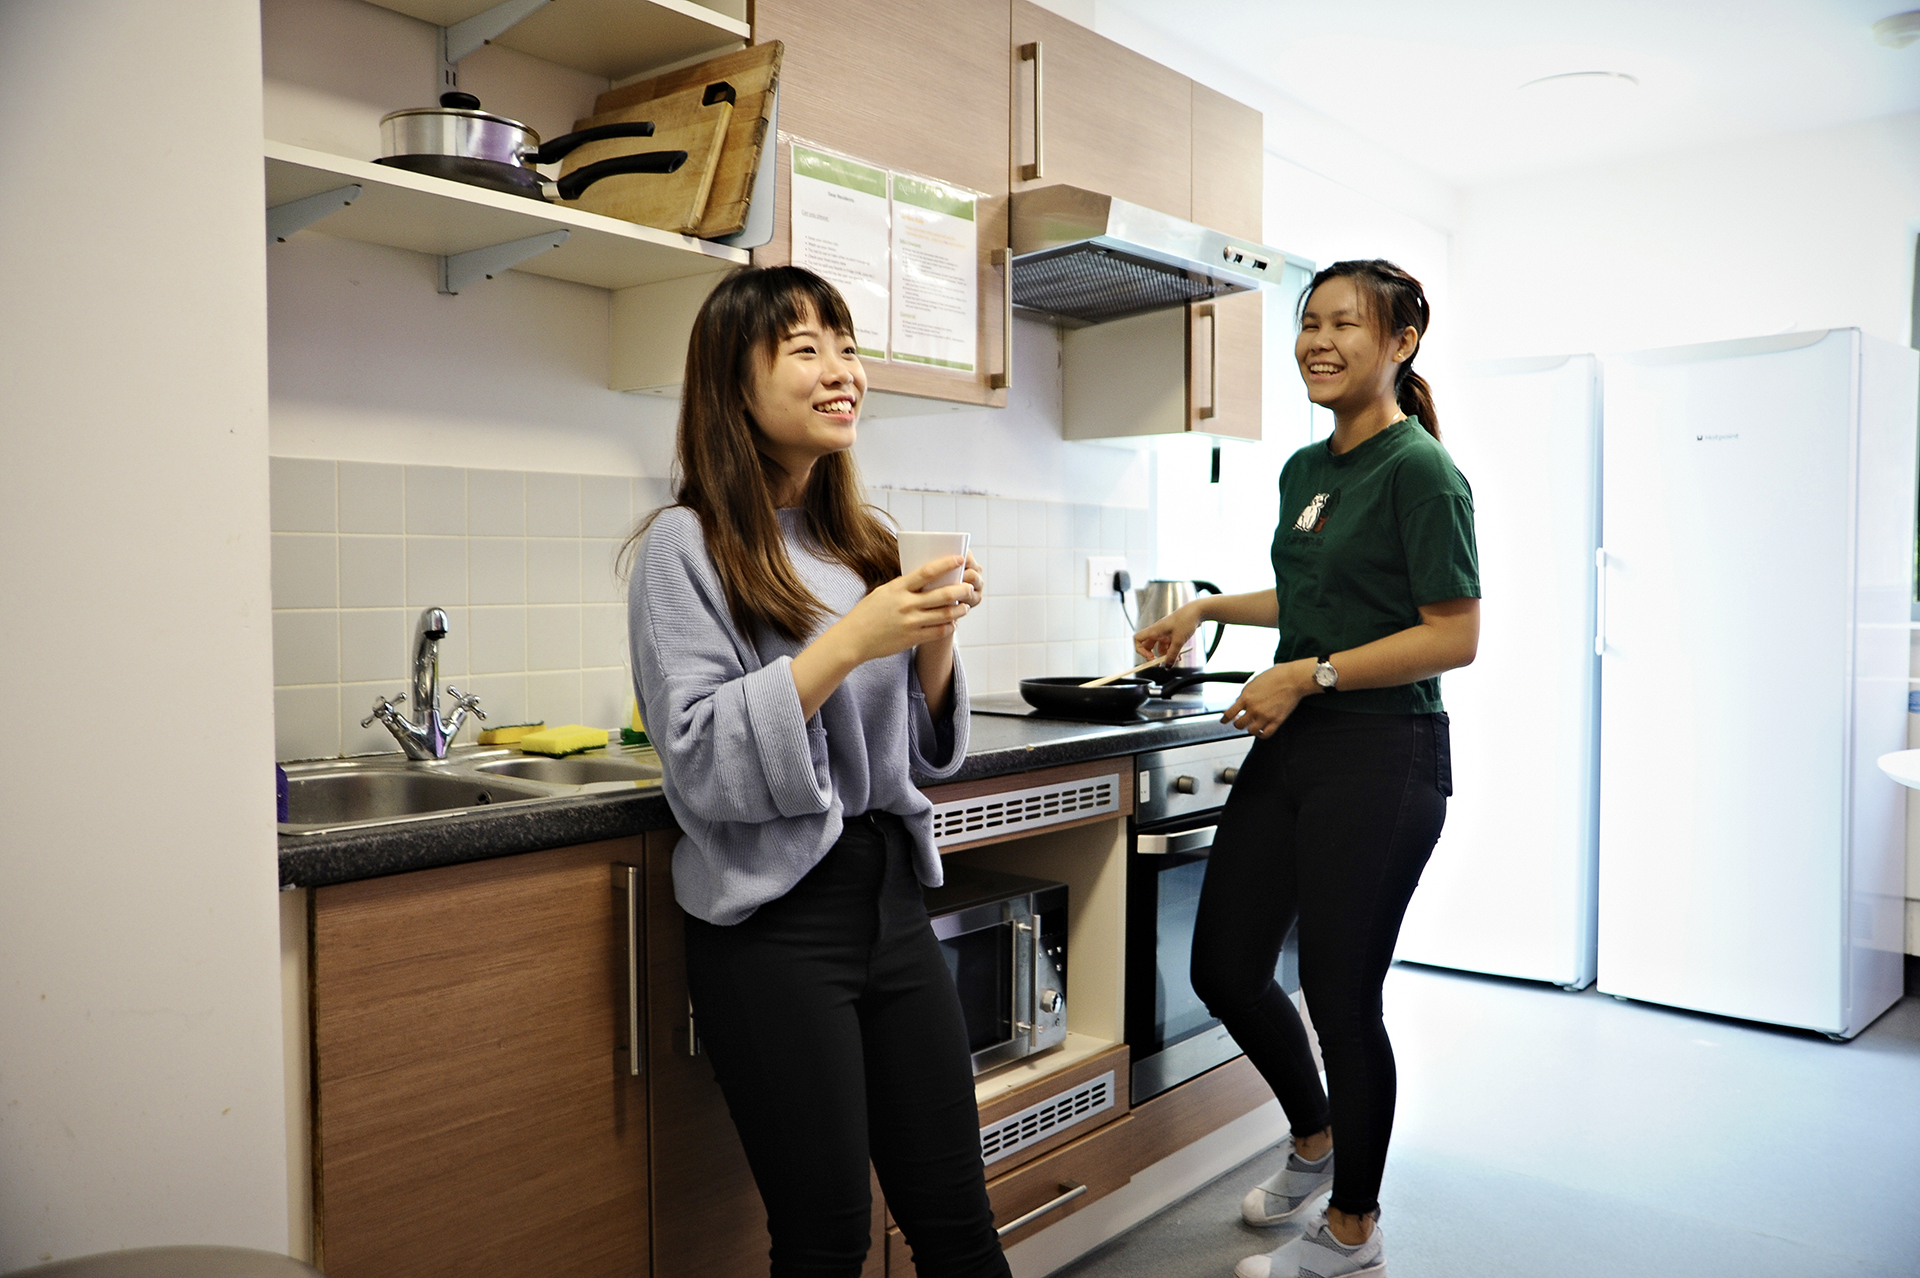 International students talking in shared kitchen in INTO University of Exeter student residences